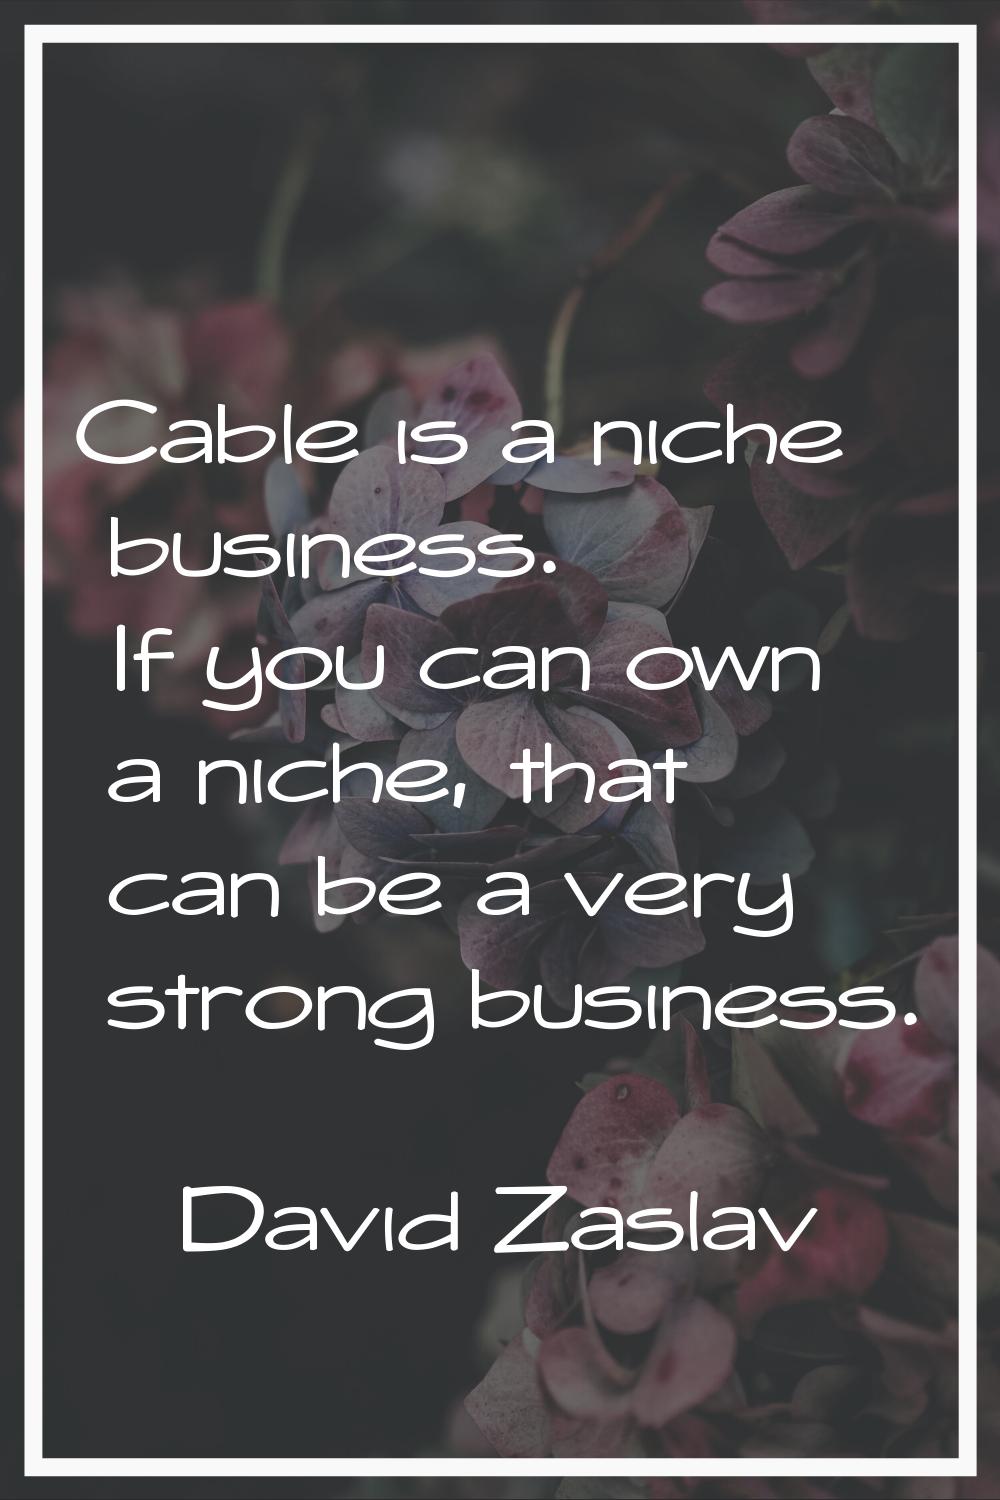 Cable is a niche business. If you can own a niche, that can be a very strong business.